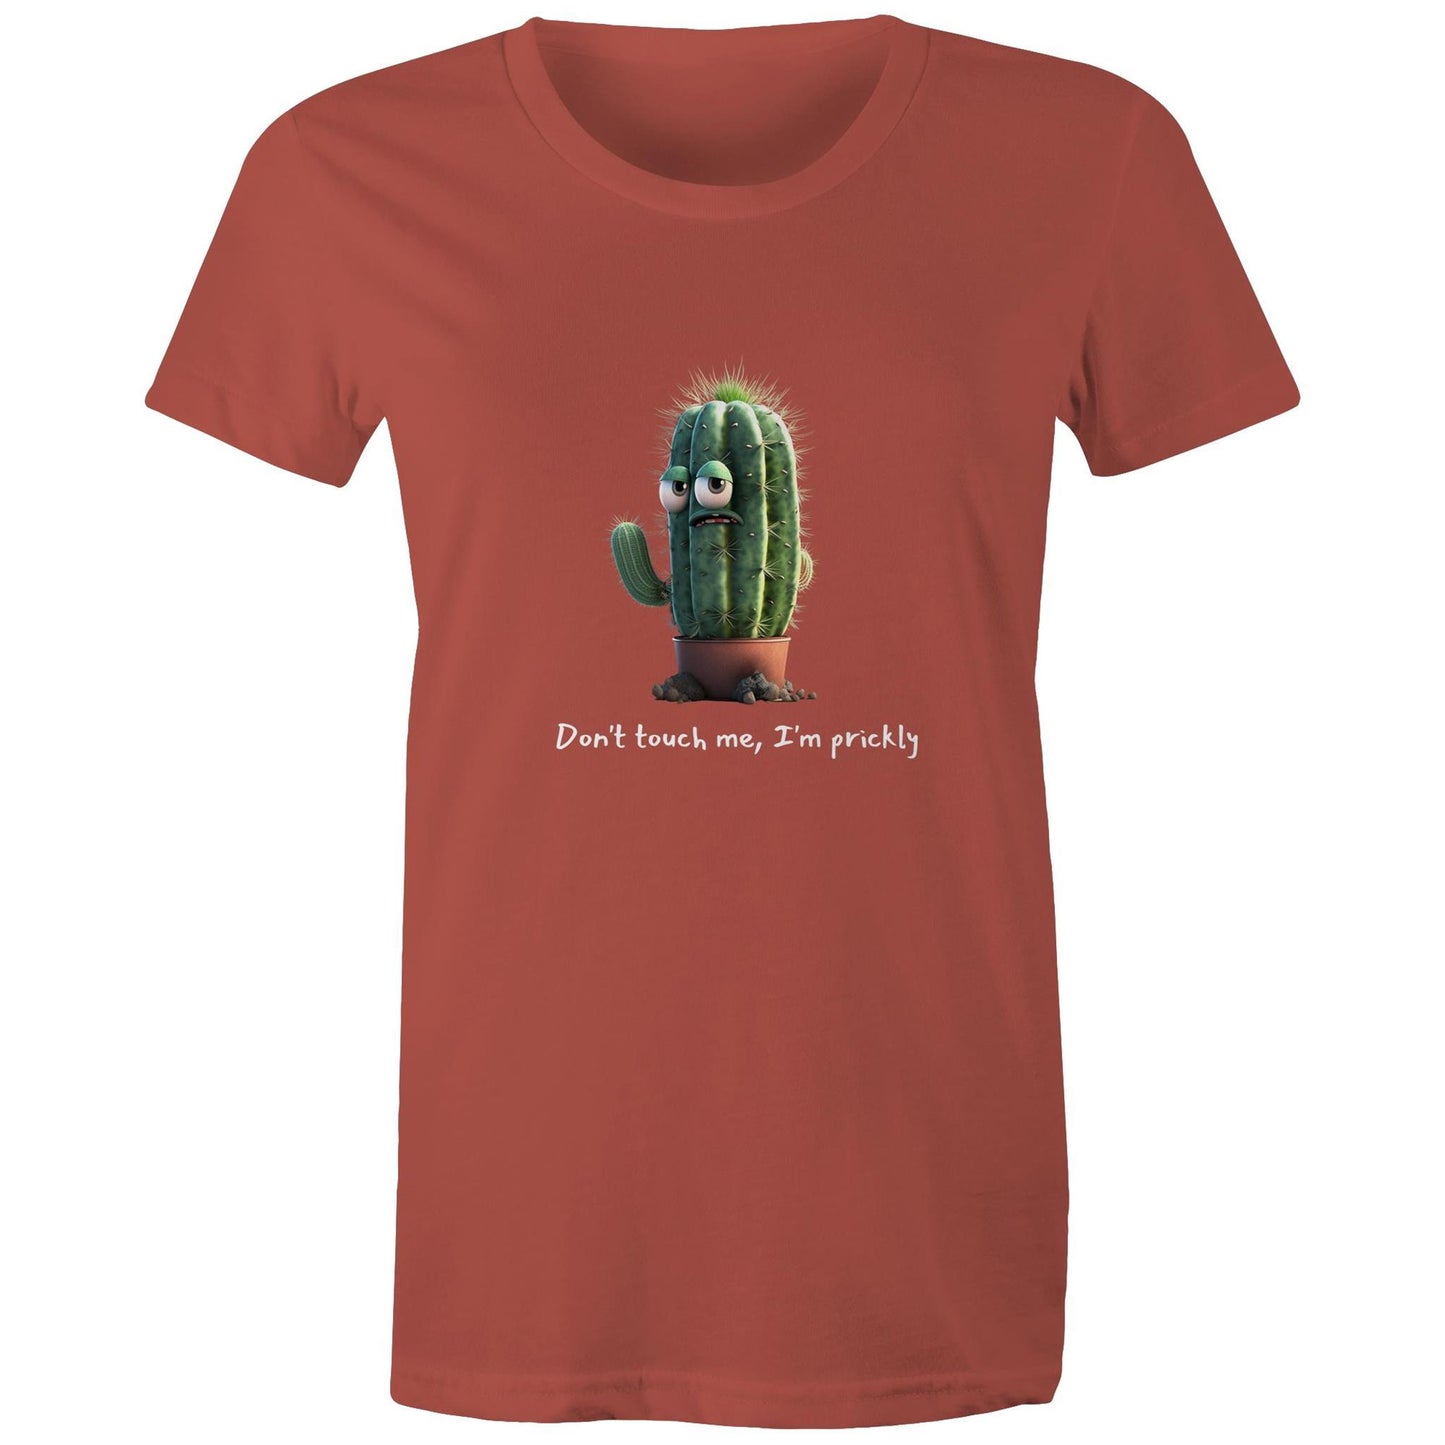 Don't Touch me, I'm prickly Women's Maple Tee